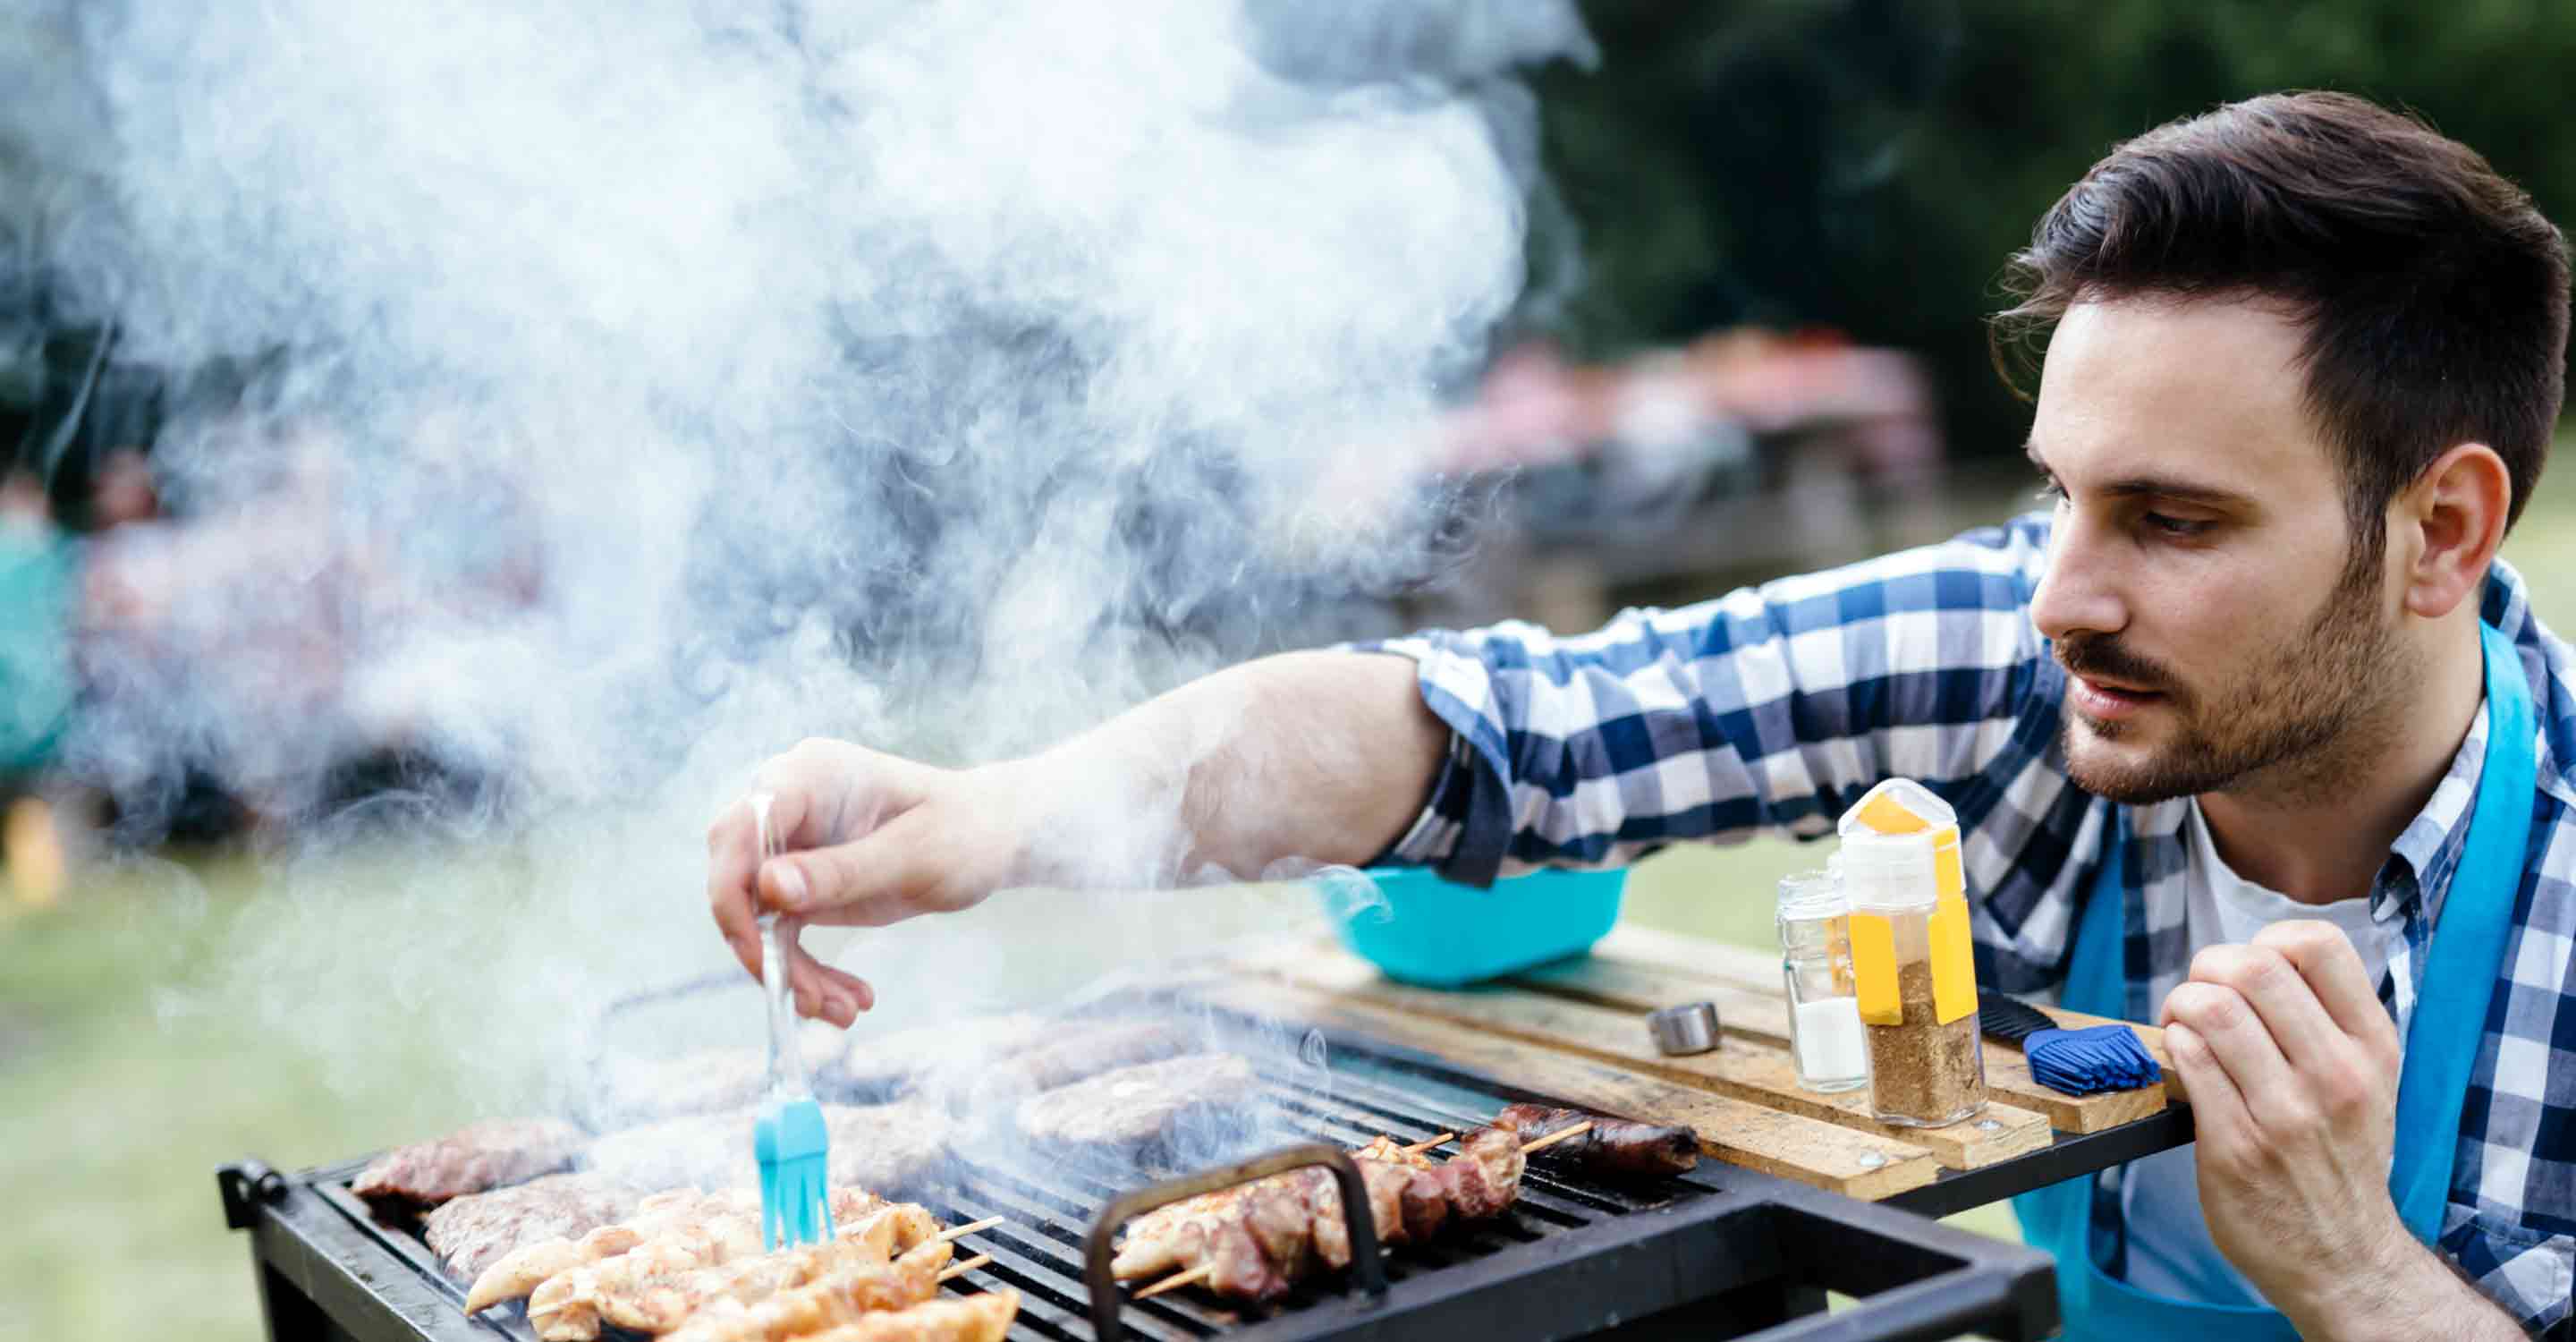 Grill vs. BBQ: What's the Difference Between Barbecue and Grilling?